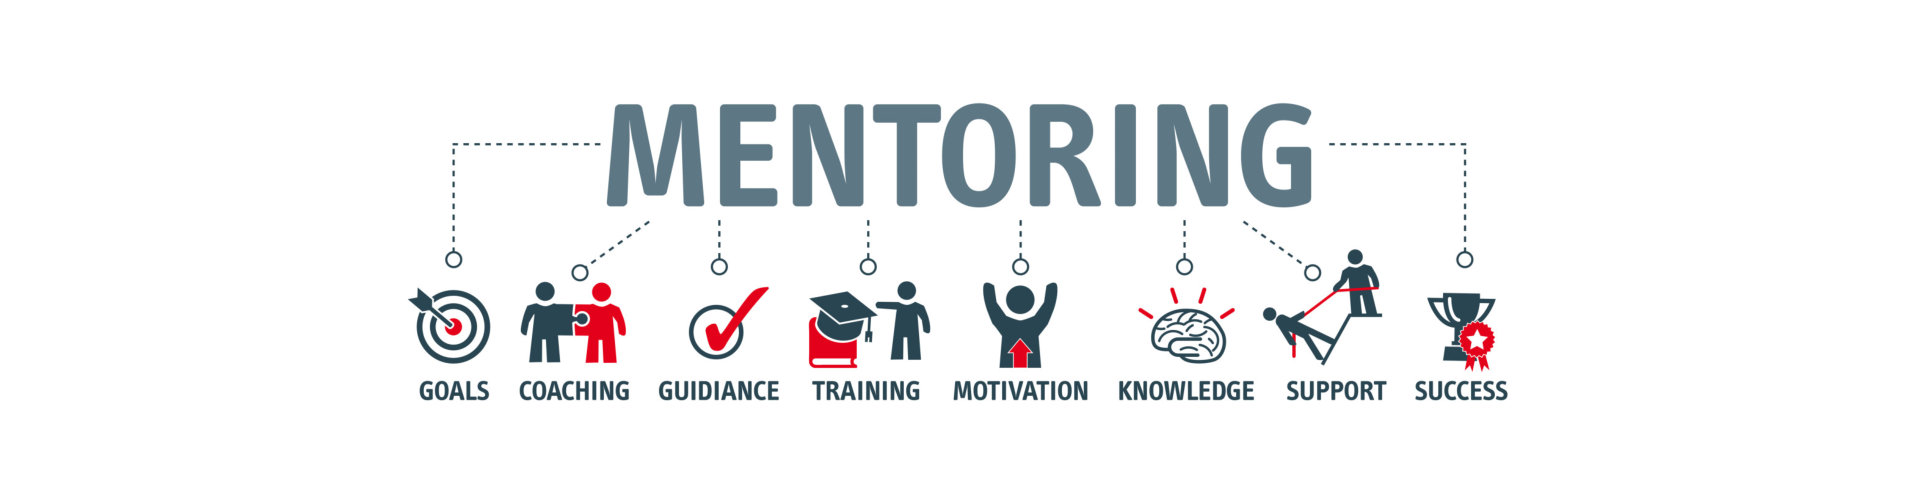 Mentoring concept. Chart with keywords and icons